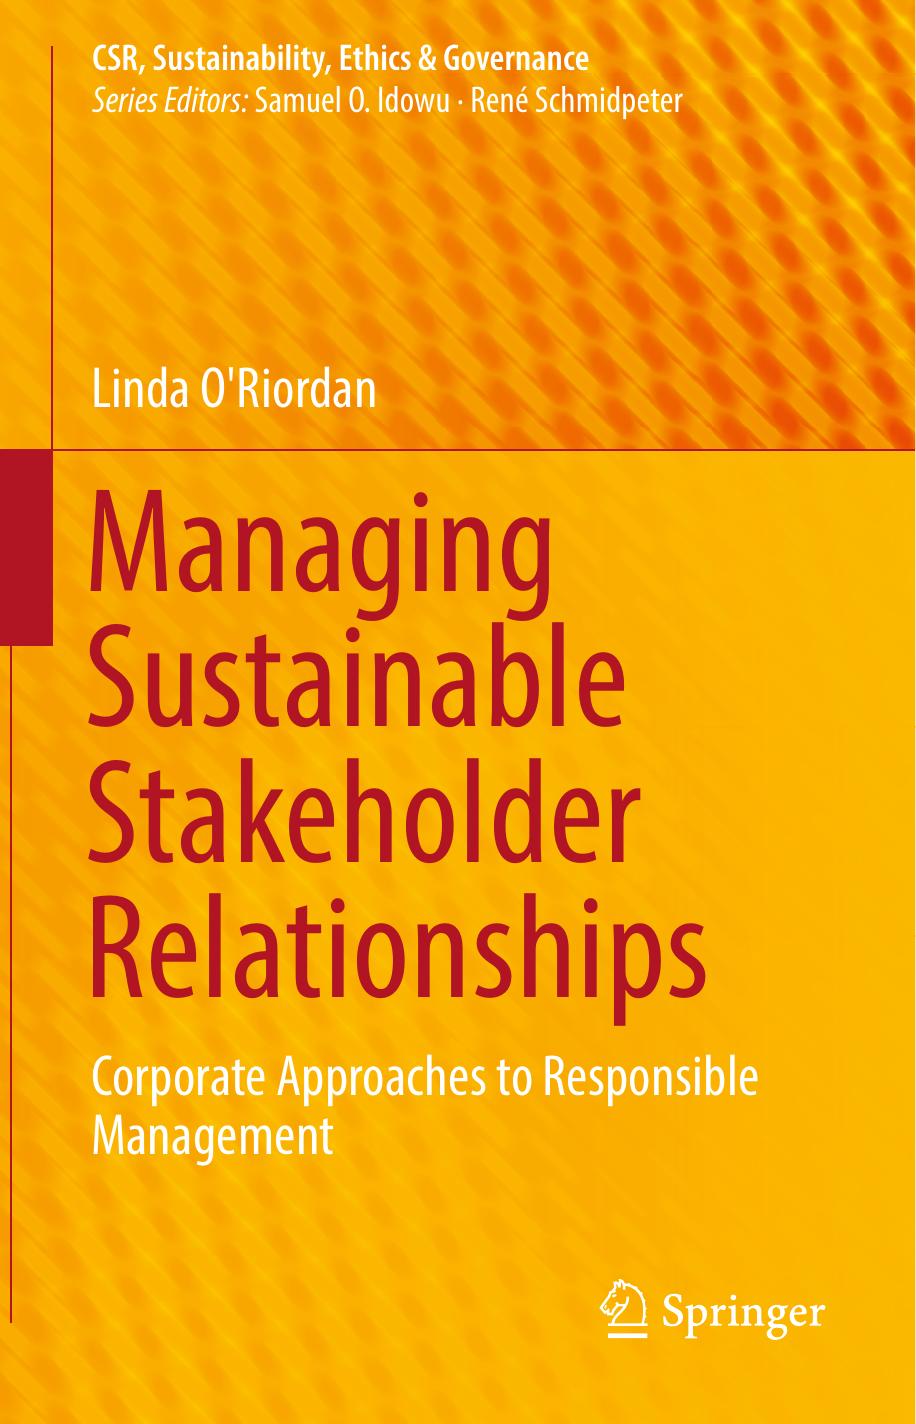 Managing Sustainable Stakeholder Relationships Corporate Approaches to Responsible Management 2017